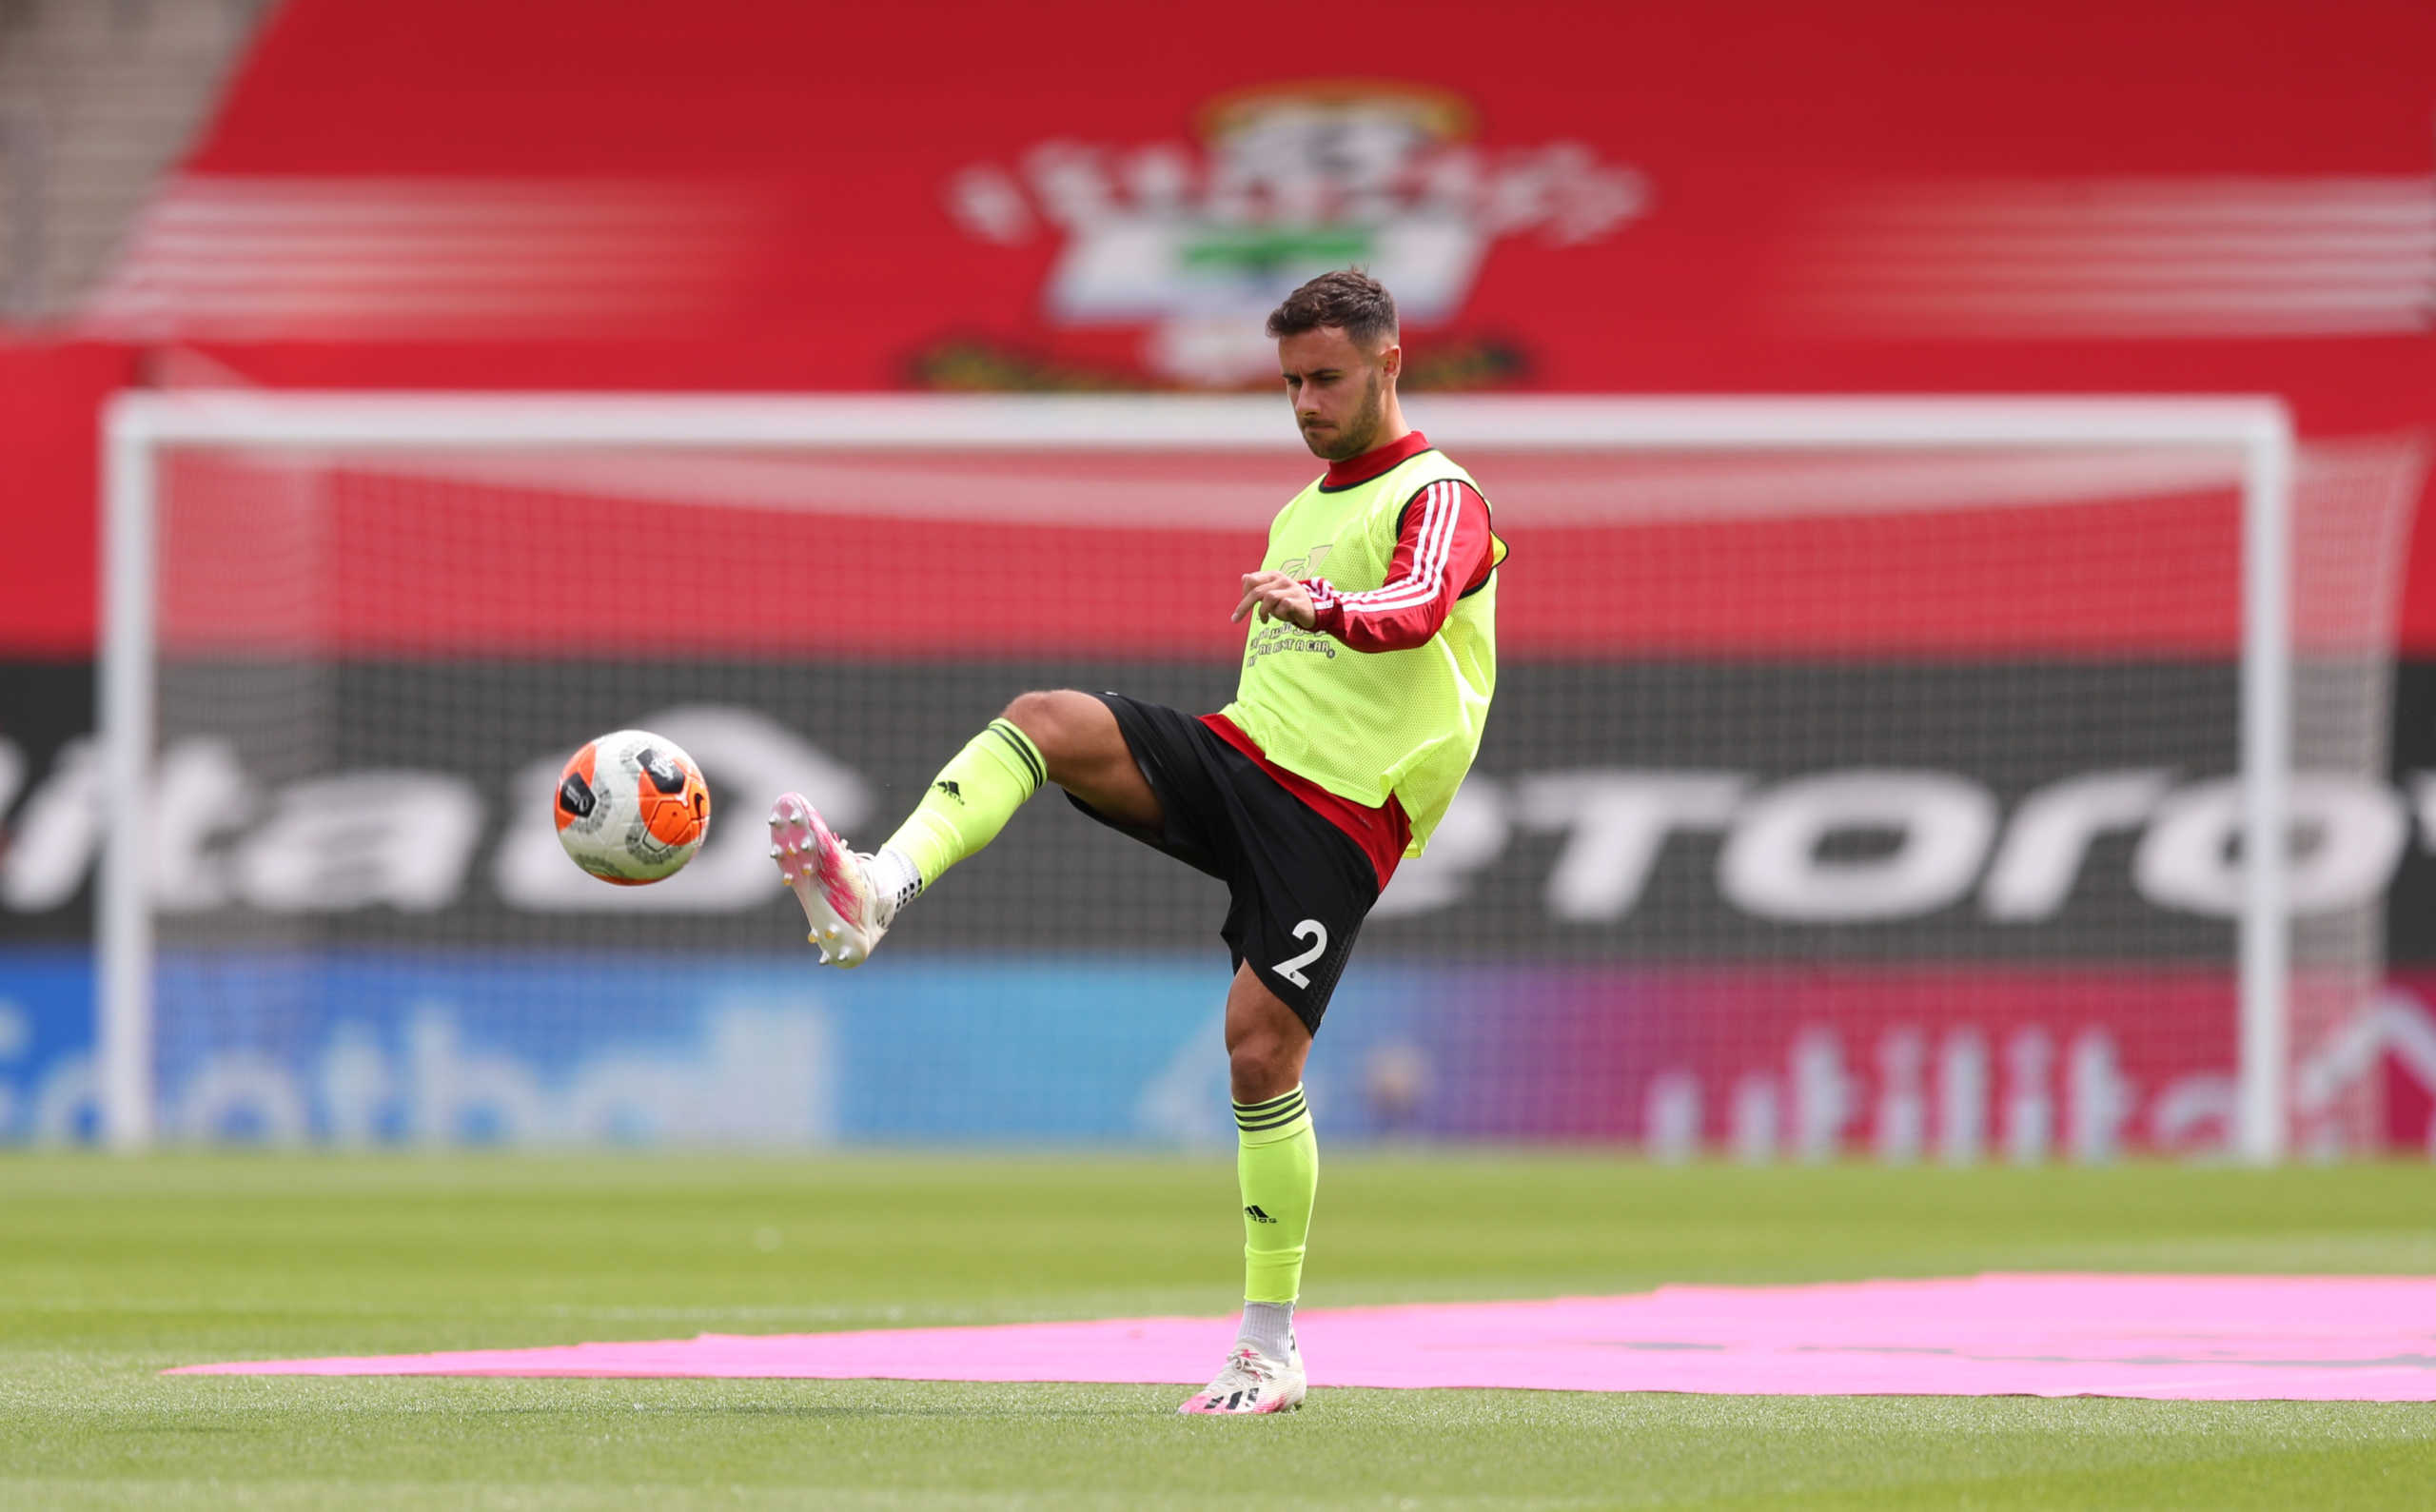 Soccer Football - Premier League - Southampton v Sheffield United - St Mary's Stadium, Southampton, Britain - July 26, 2020  Sheffield United's George Baldock during the warm up before the match, as play resumes behind closed doors following the outbreak of the coronavirus disease (COVID-19) Pool via REUTERS/Naomi Baker EDITORIAL USE ONLY. No use with unauthorized audio, video, data, fixture lists, club/league logos or 'live' services. Online in-match use limited to 75 images, no video emulation. No use in betting, games or single club/league/player publications.  Please contact your account representative for further details.